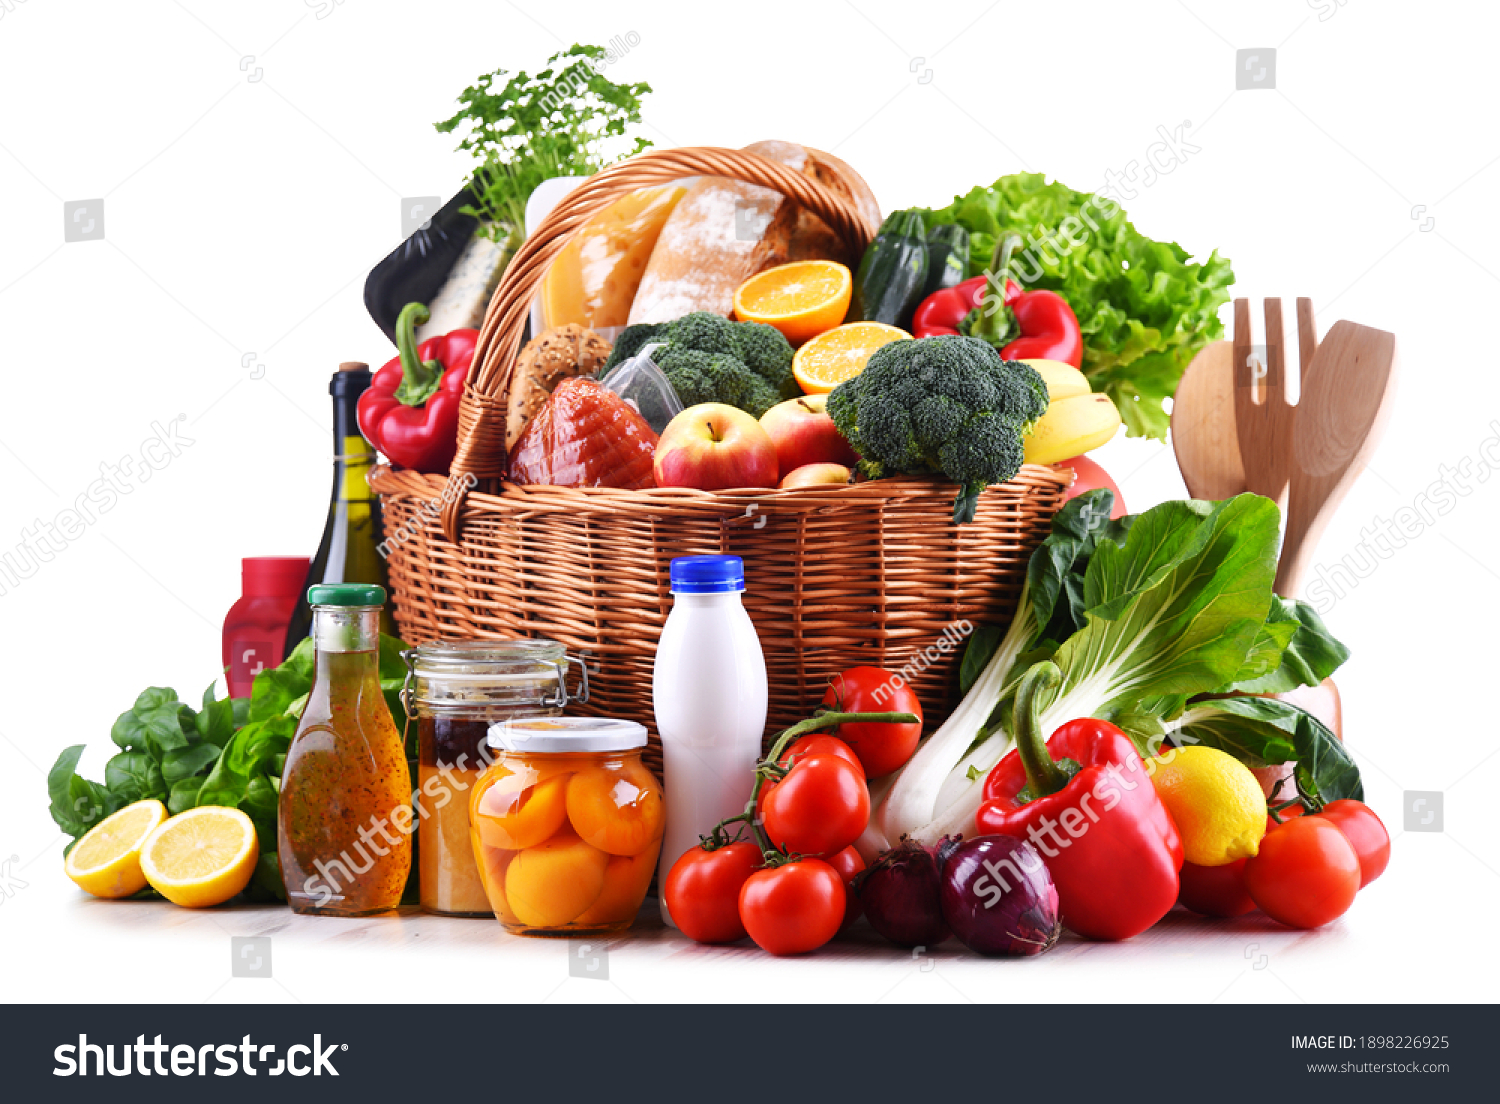 Wicker basket with assorted grocery products including fresh vegetables and fruits #1898226925